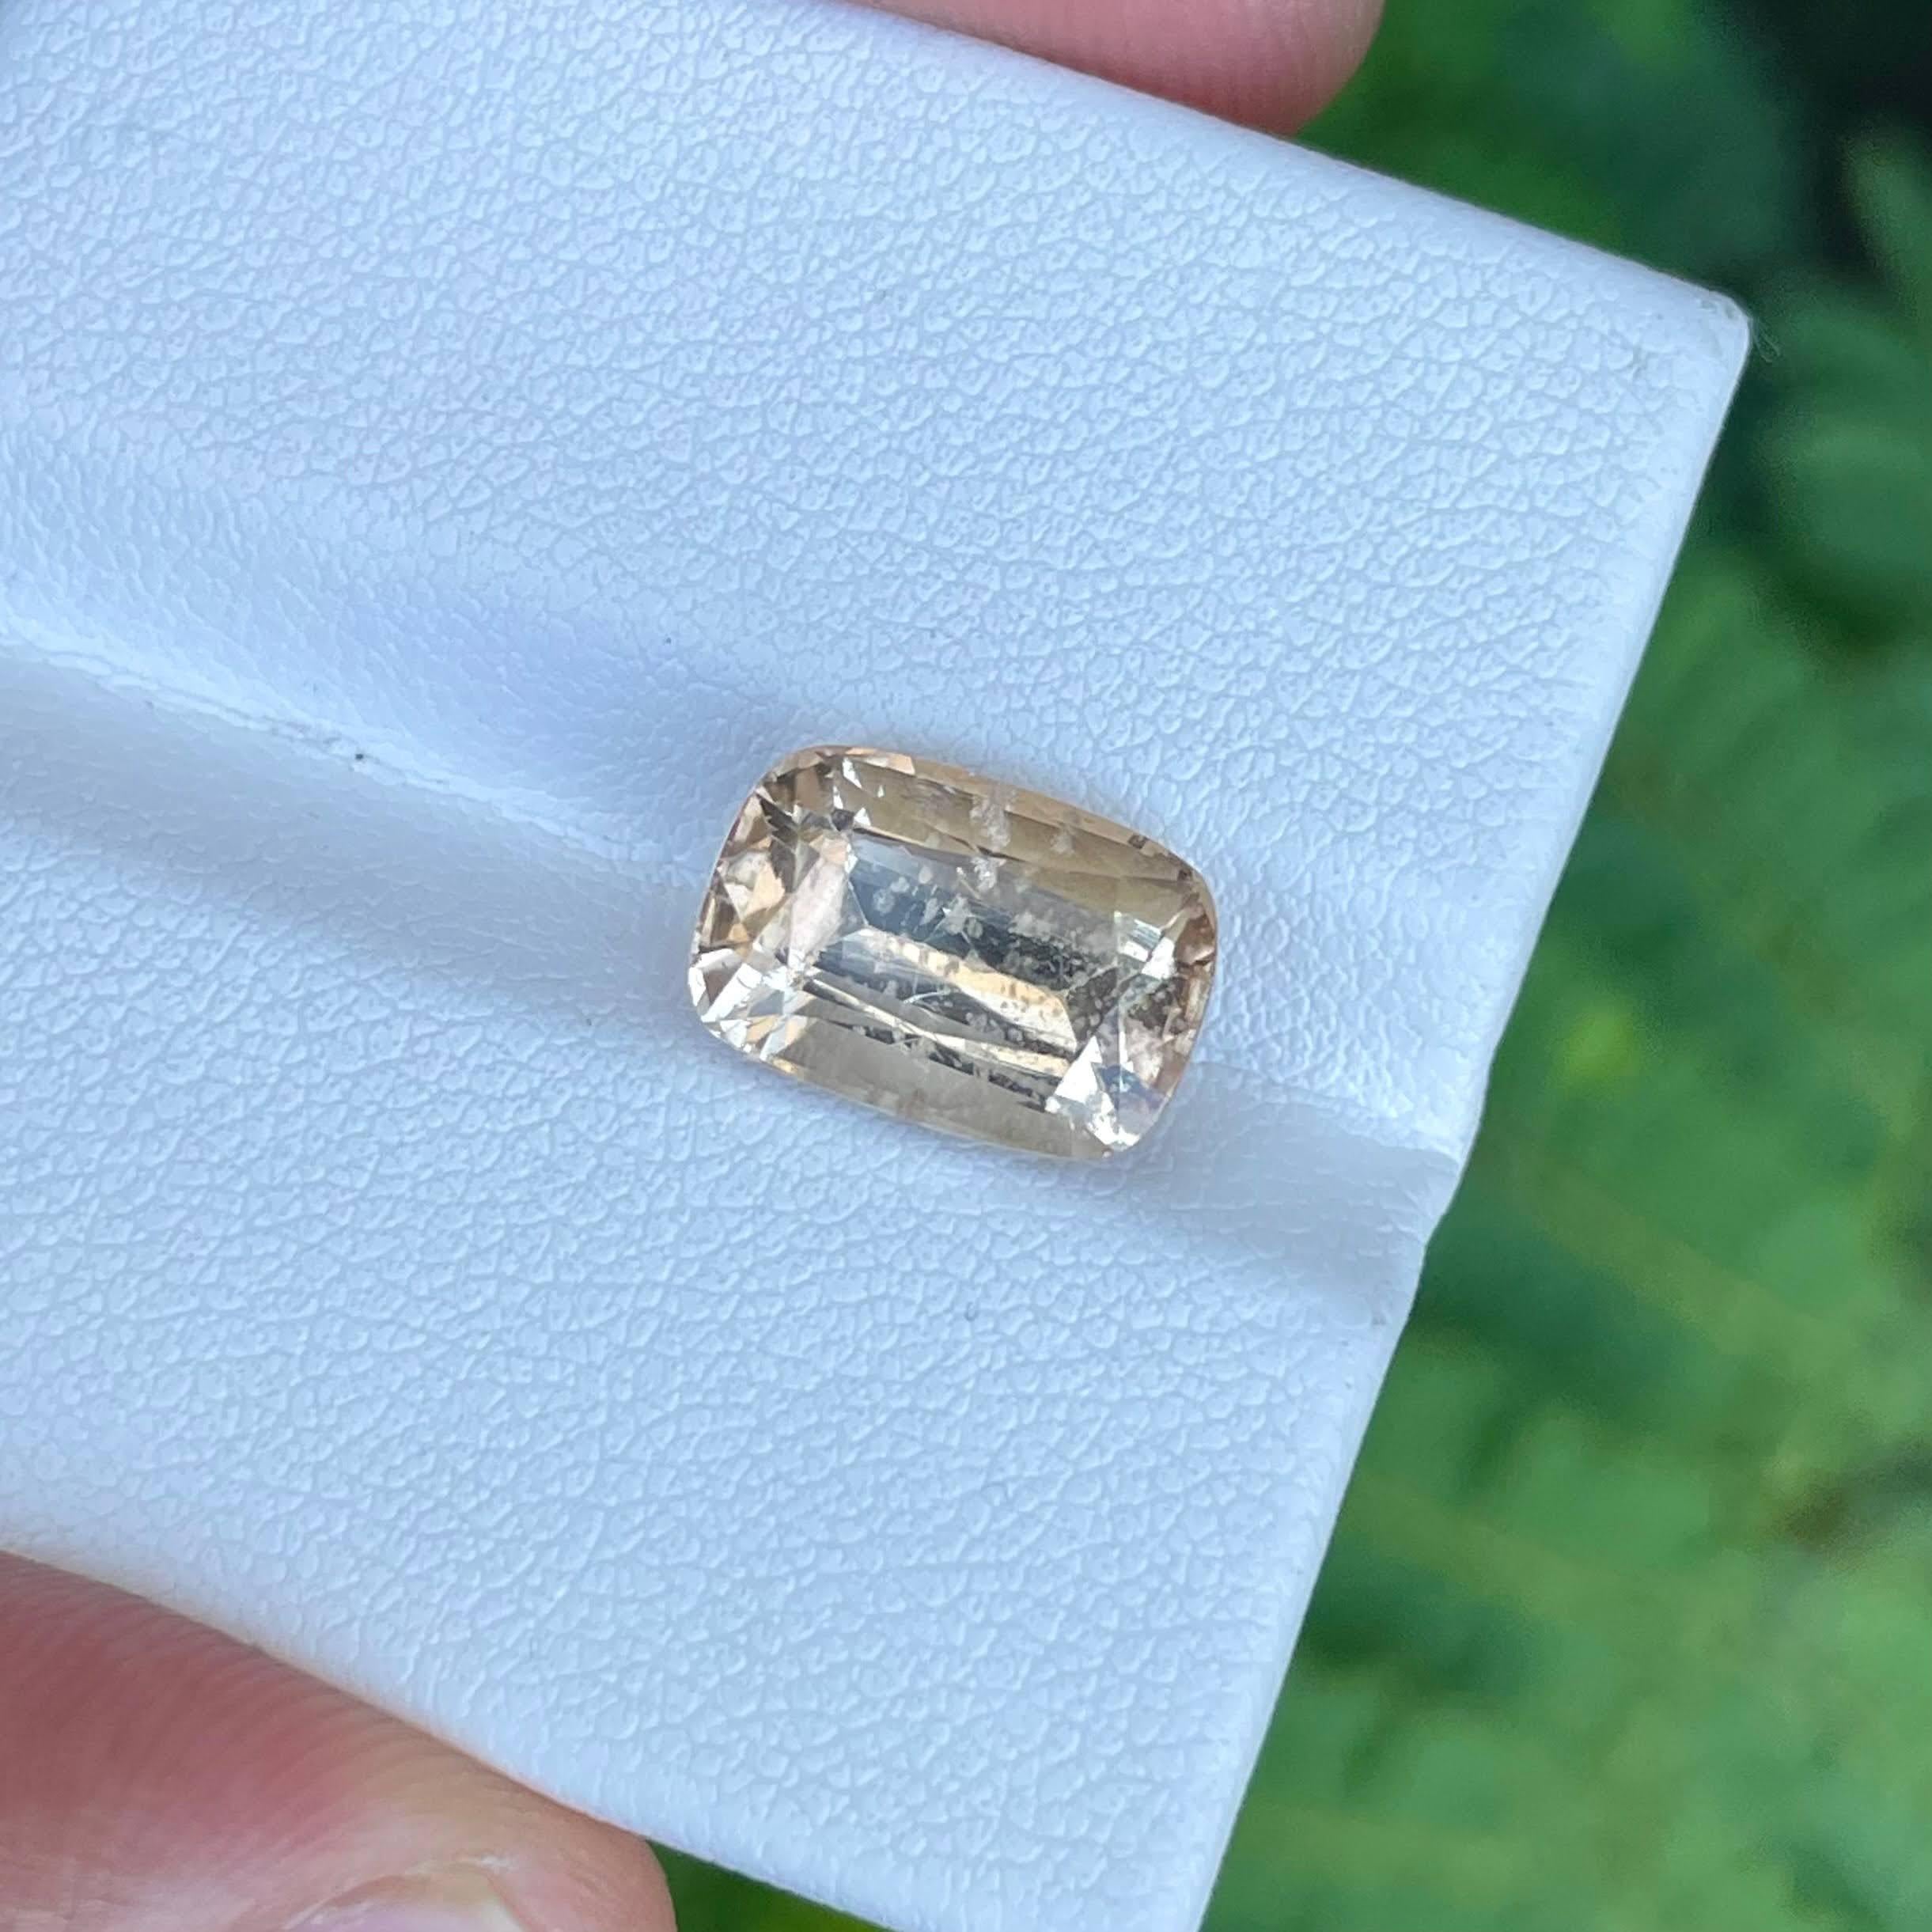 Quality Imperial Topaz 5.75 carats Fancy Cushion Cut Natural Pakistani Gemstone In New Condition For Sale In Bangkok, TH